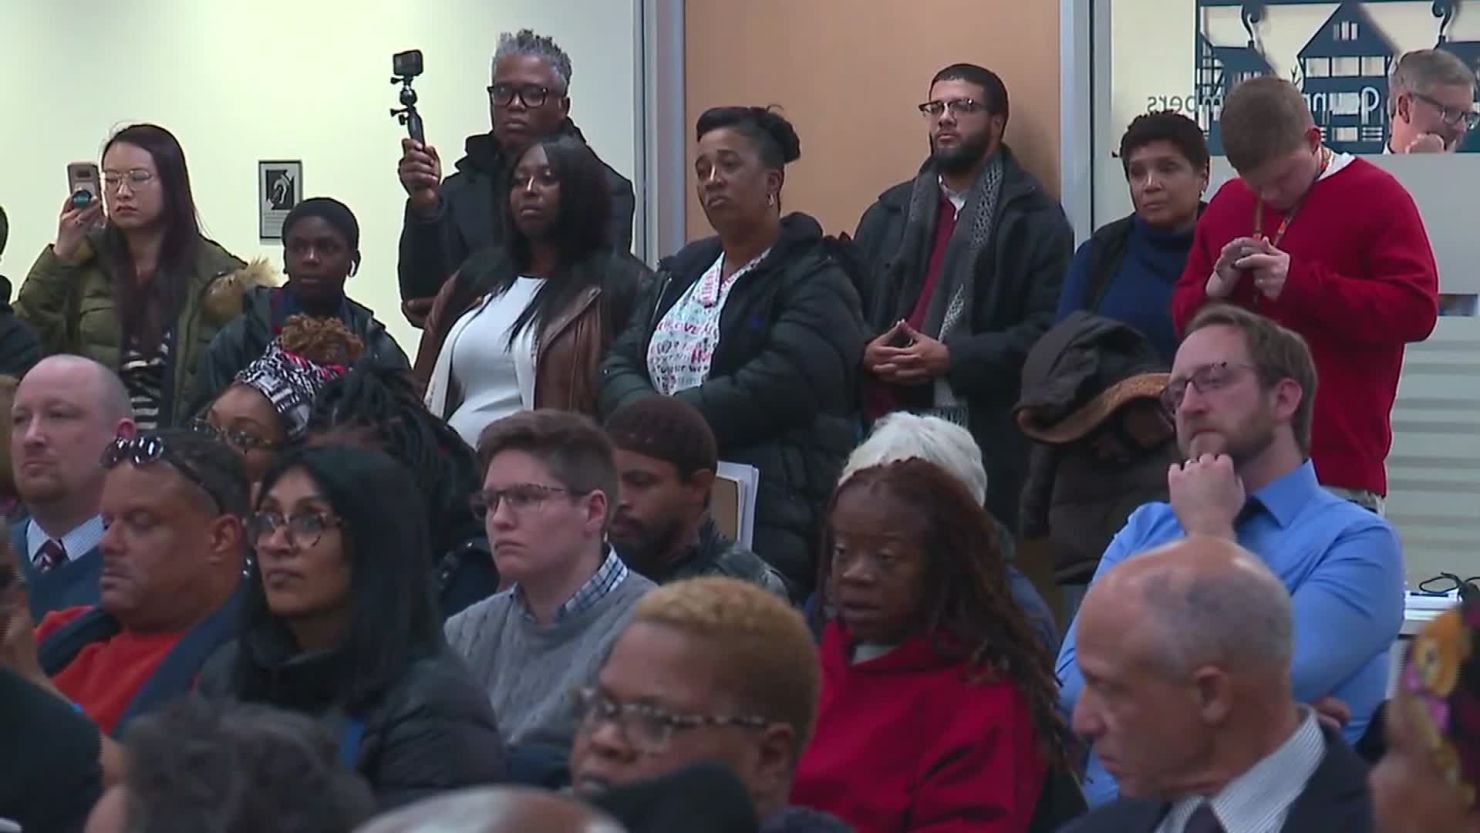 Jacqueline Jackson, standing at center in back, waits her turn to address the county council about conditions in local jails. Her nephew died in a Cuyahoga County correctional facility in 2015.